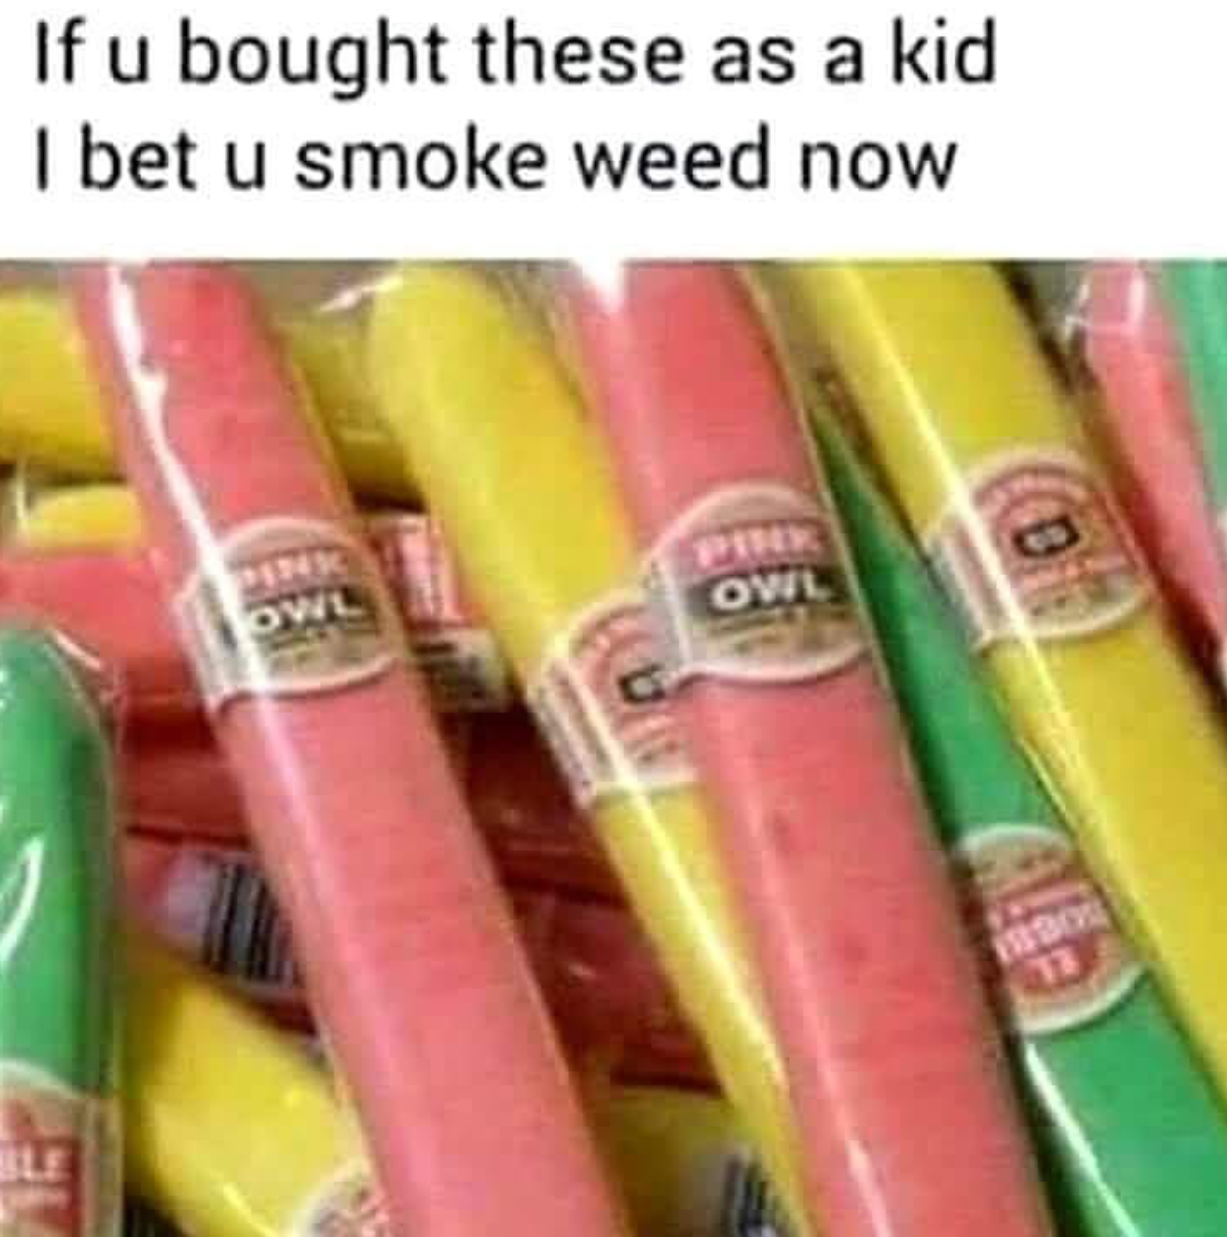 share if you remember candy - If u bought these as a kid I bet u smoke weed now